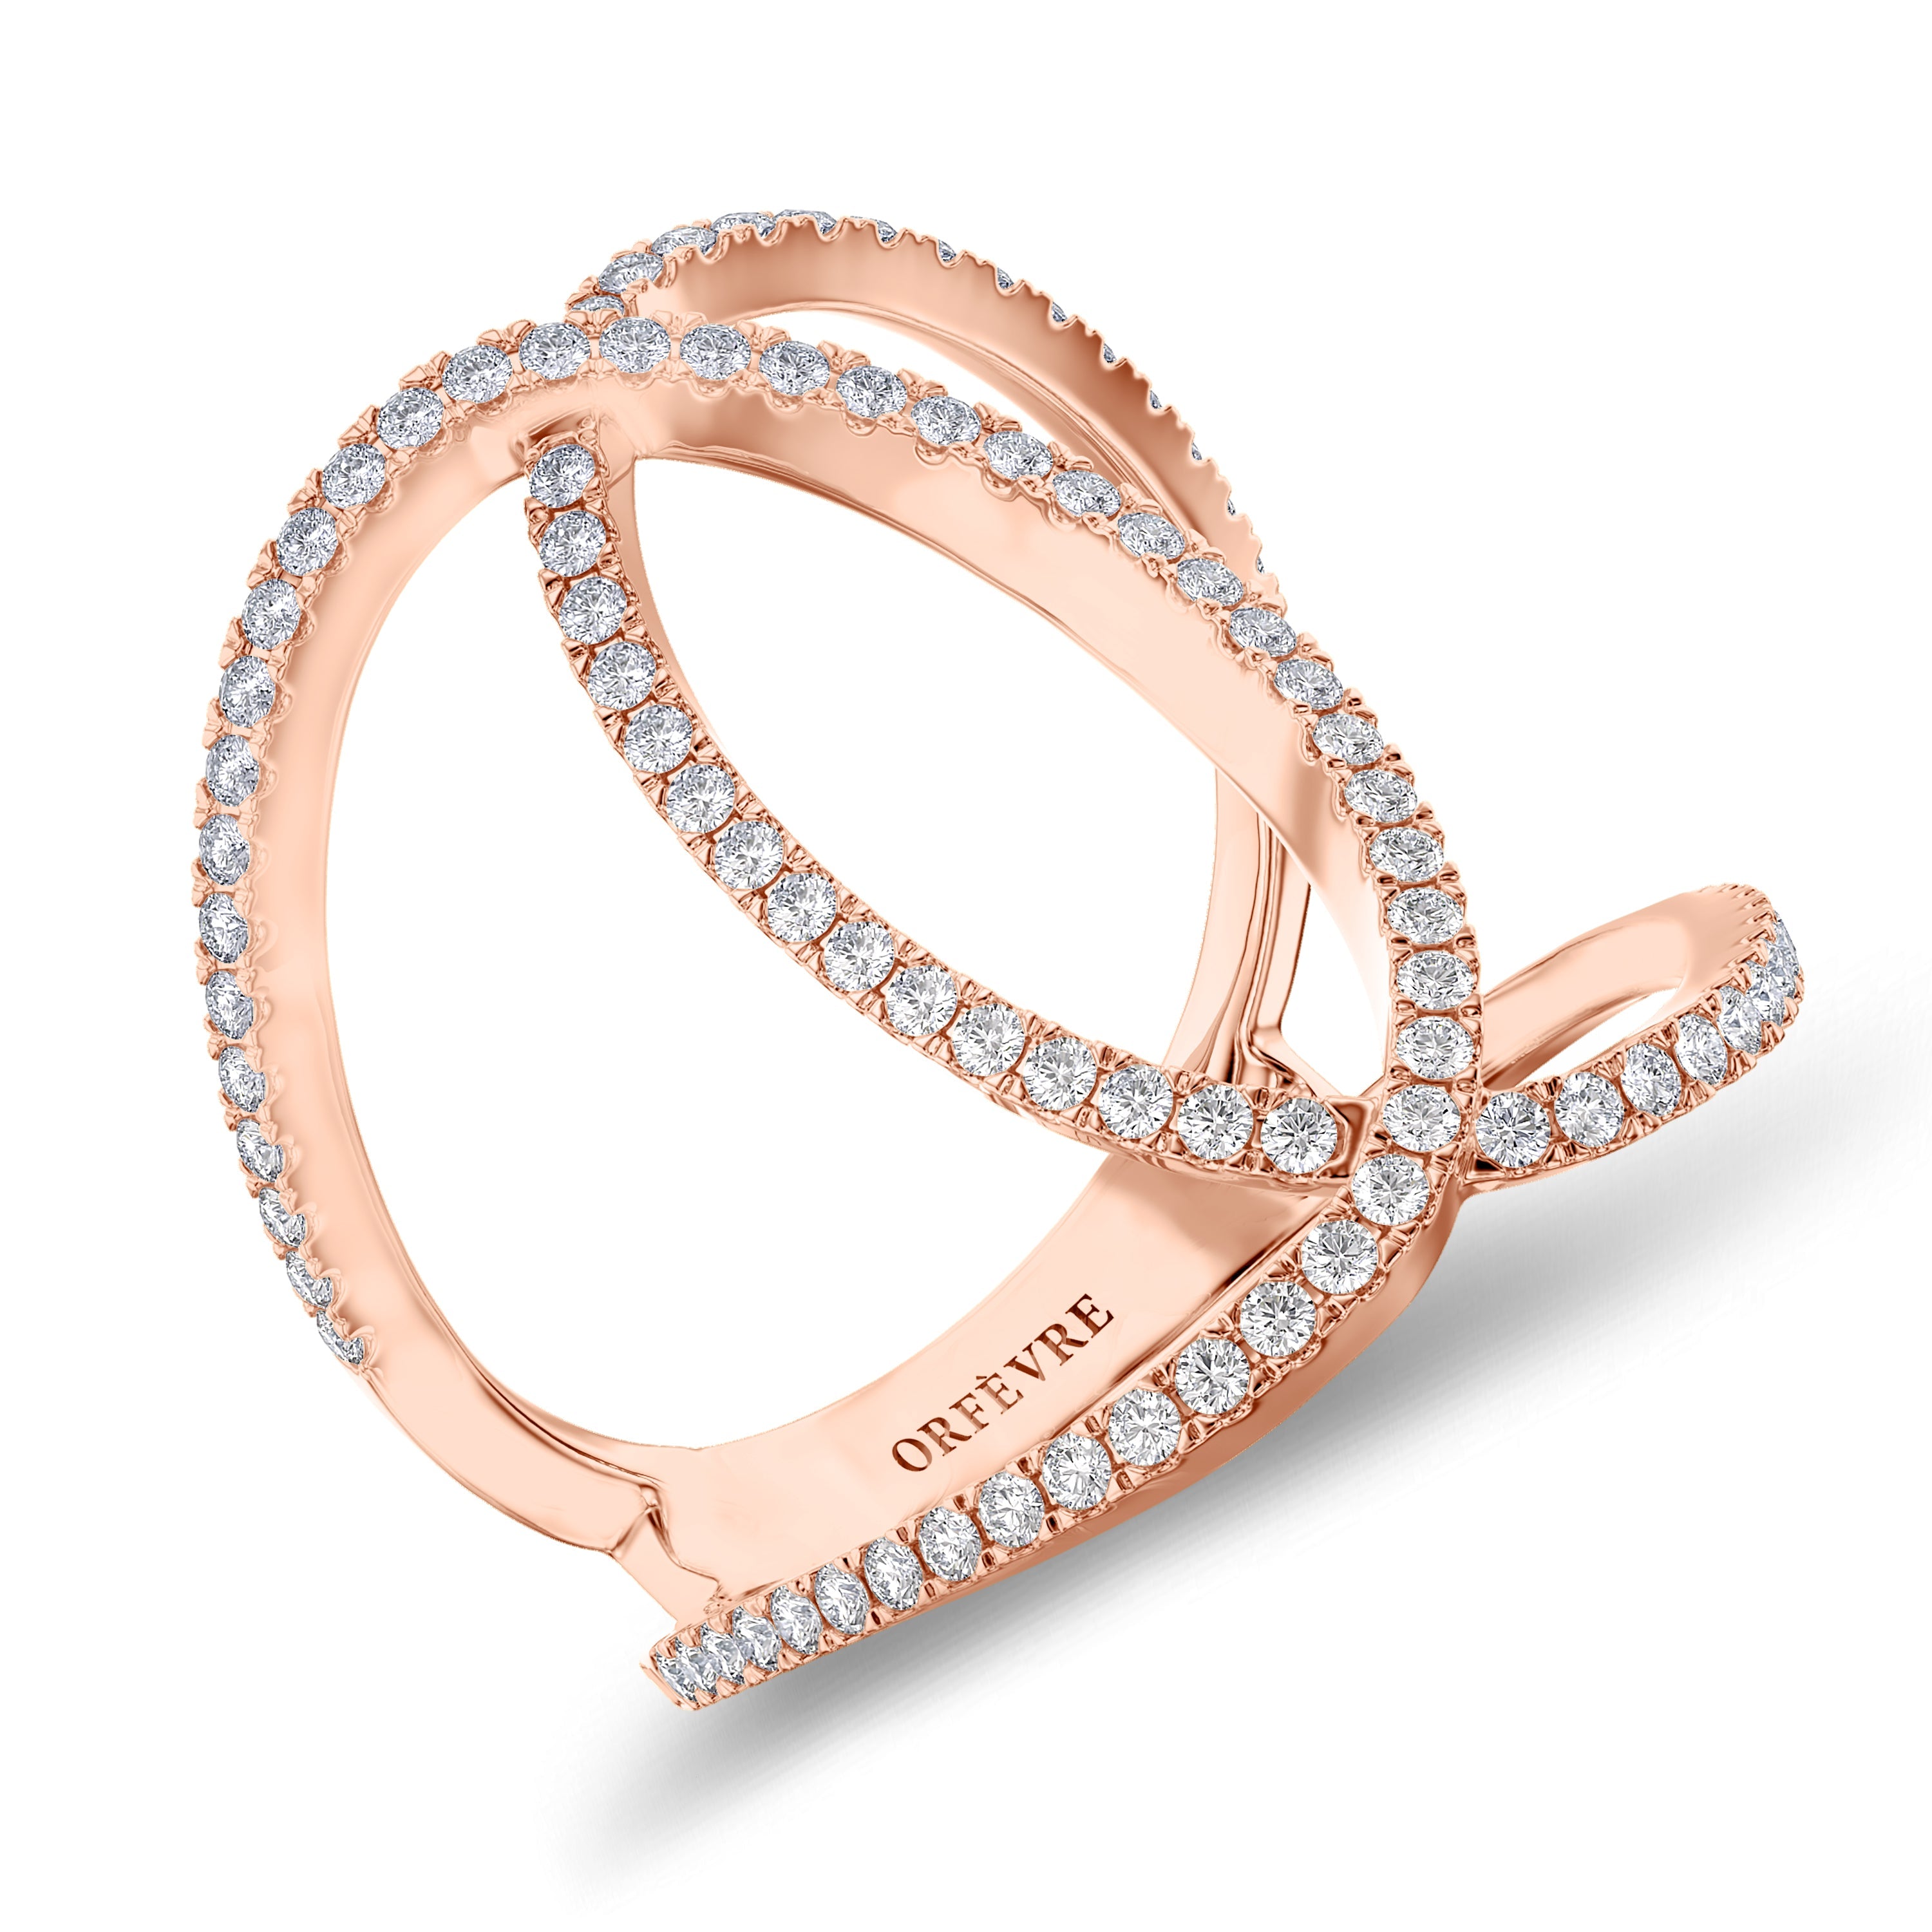 18K rose gold criss cross ring with 0.59 carat, FG Color, SI Clarity